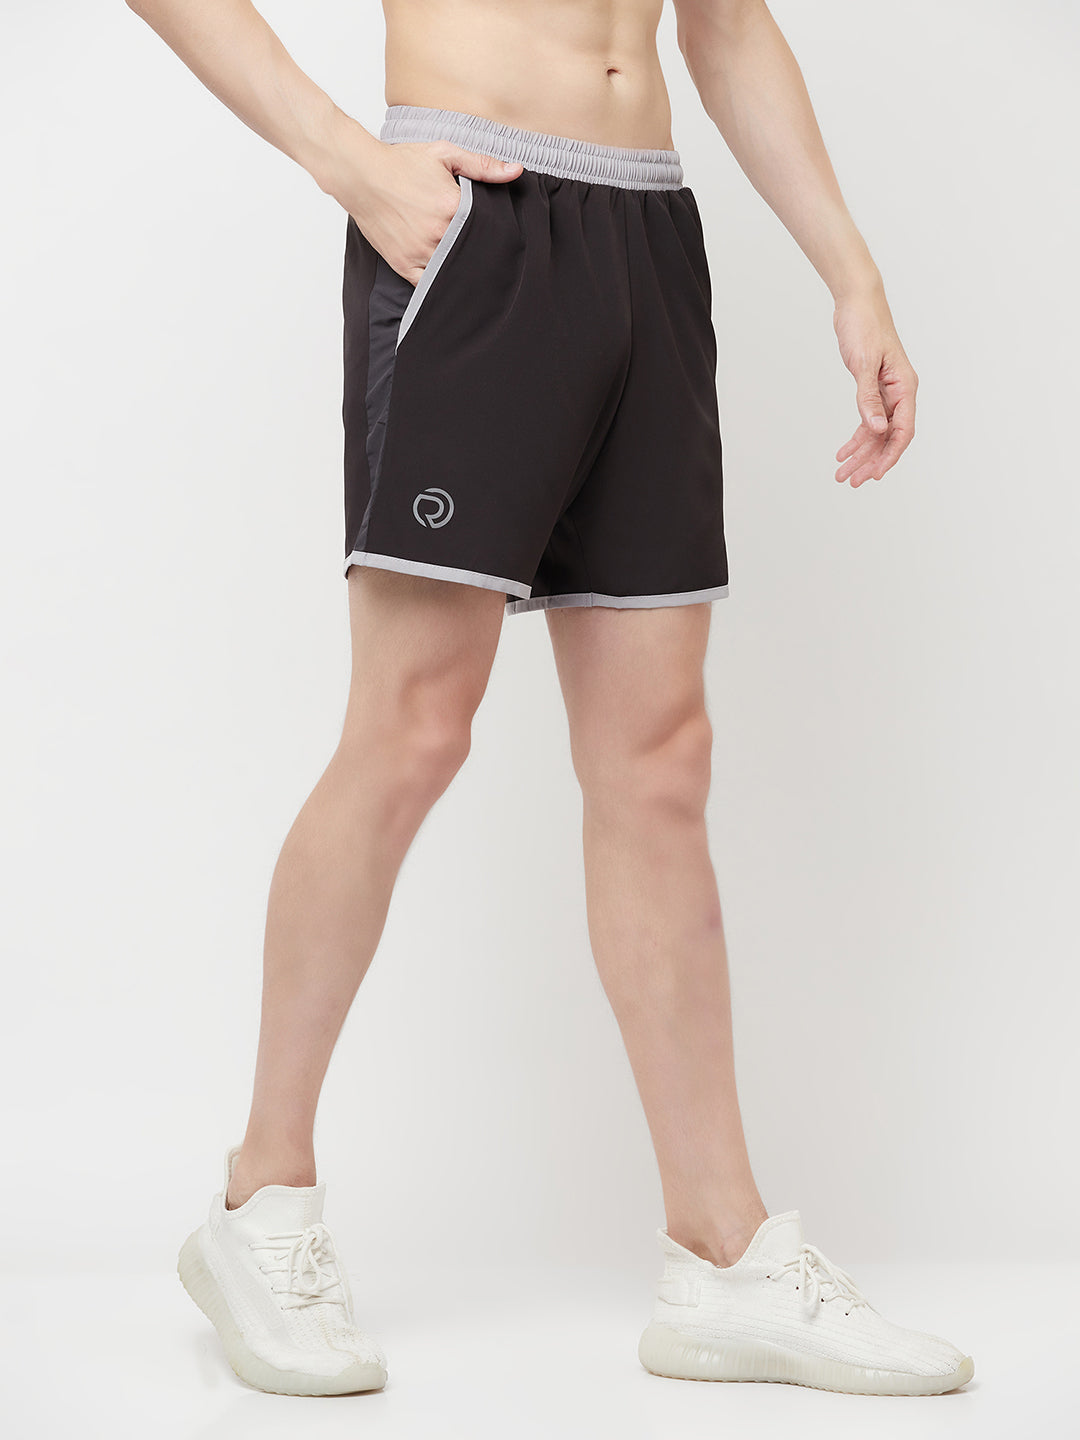 7" Shorts with Zipper Pocket - Pack of 2 Black & White